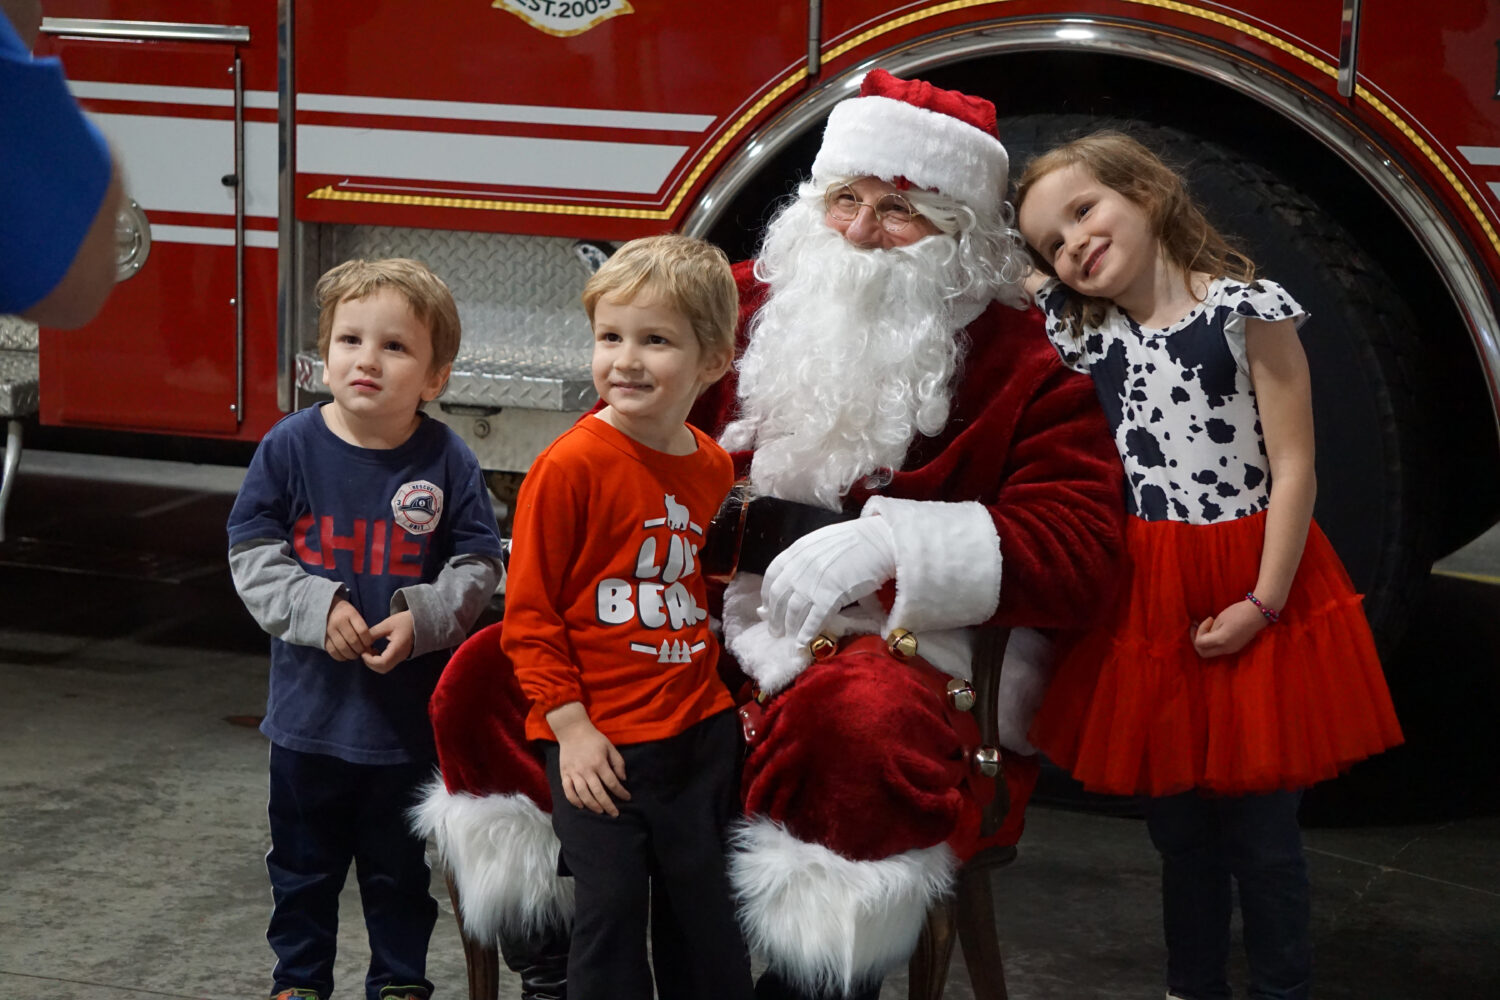 PRFD draws about 175 kids to see Santa